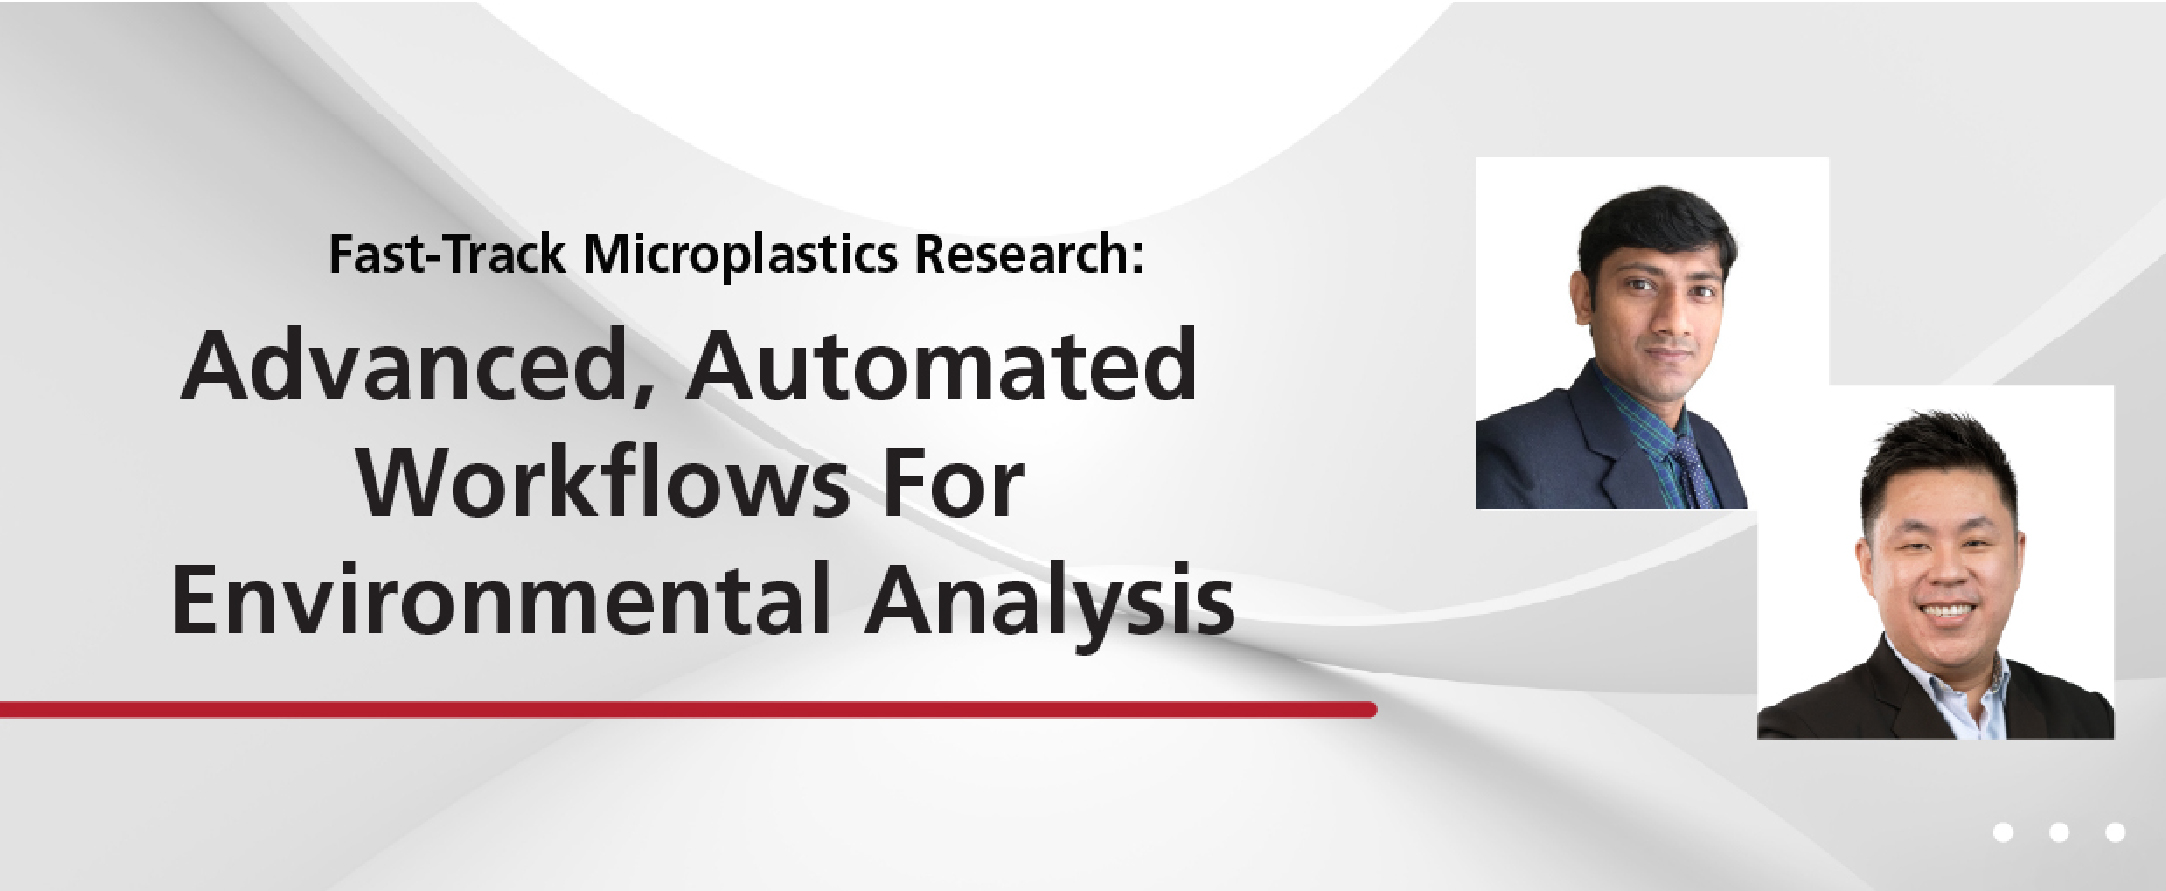 Fast-Track Microplastics Research: Advanced, Automated Workflows for Environmental Analysis